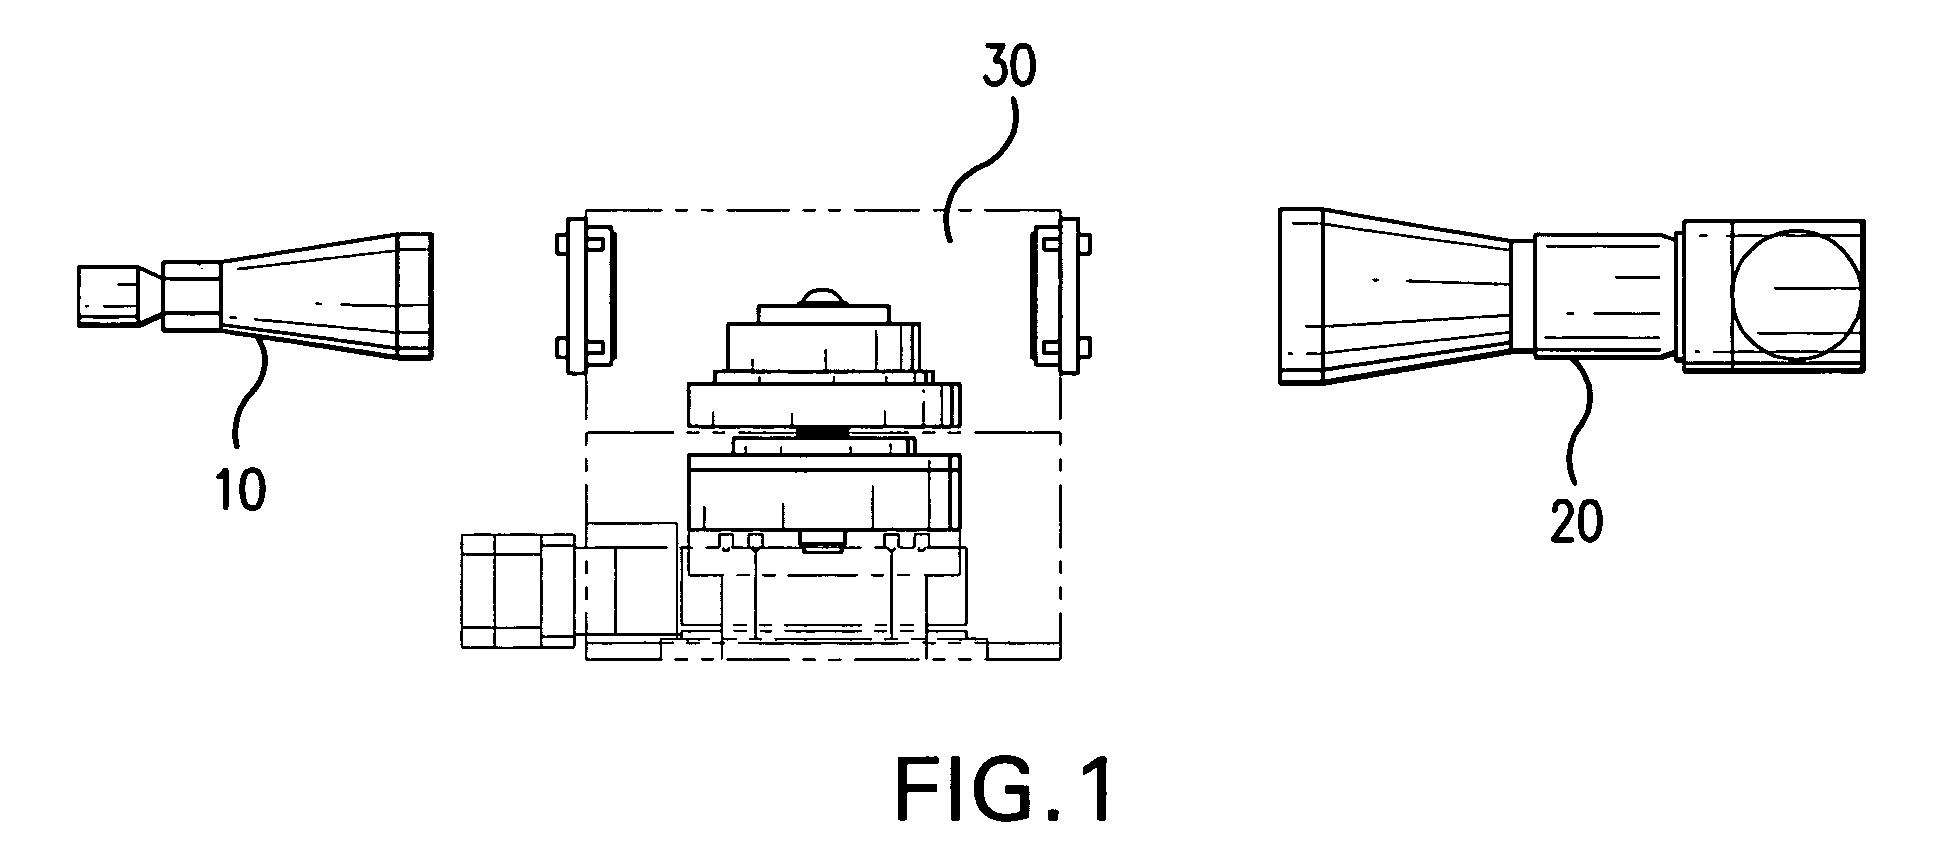 Apparatus and method for detecting lens thickness